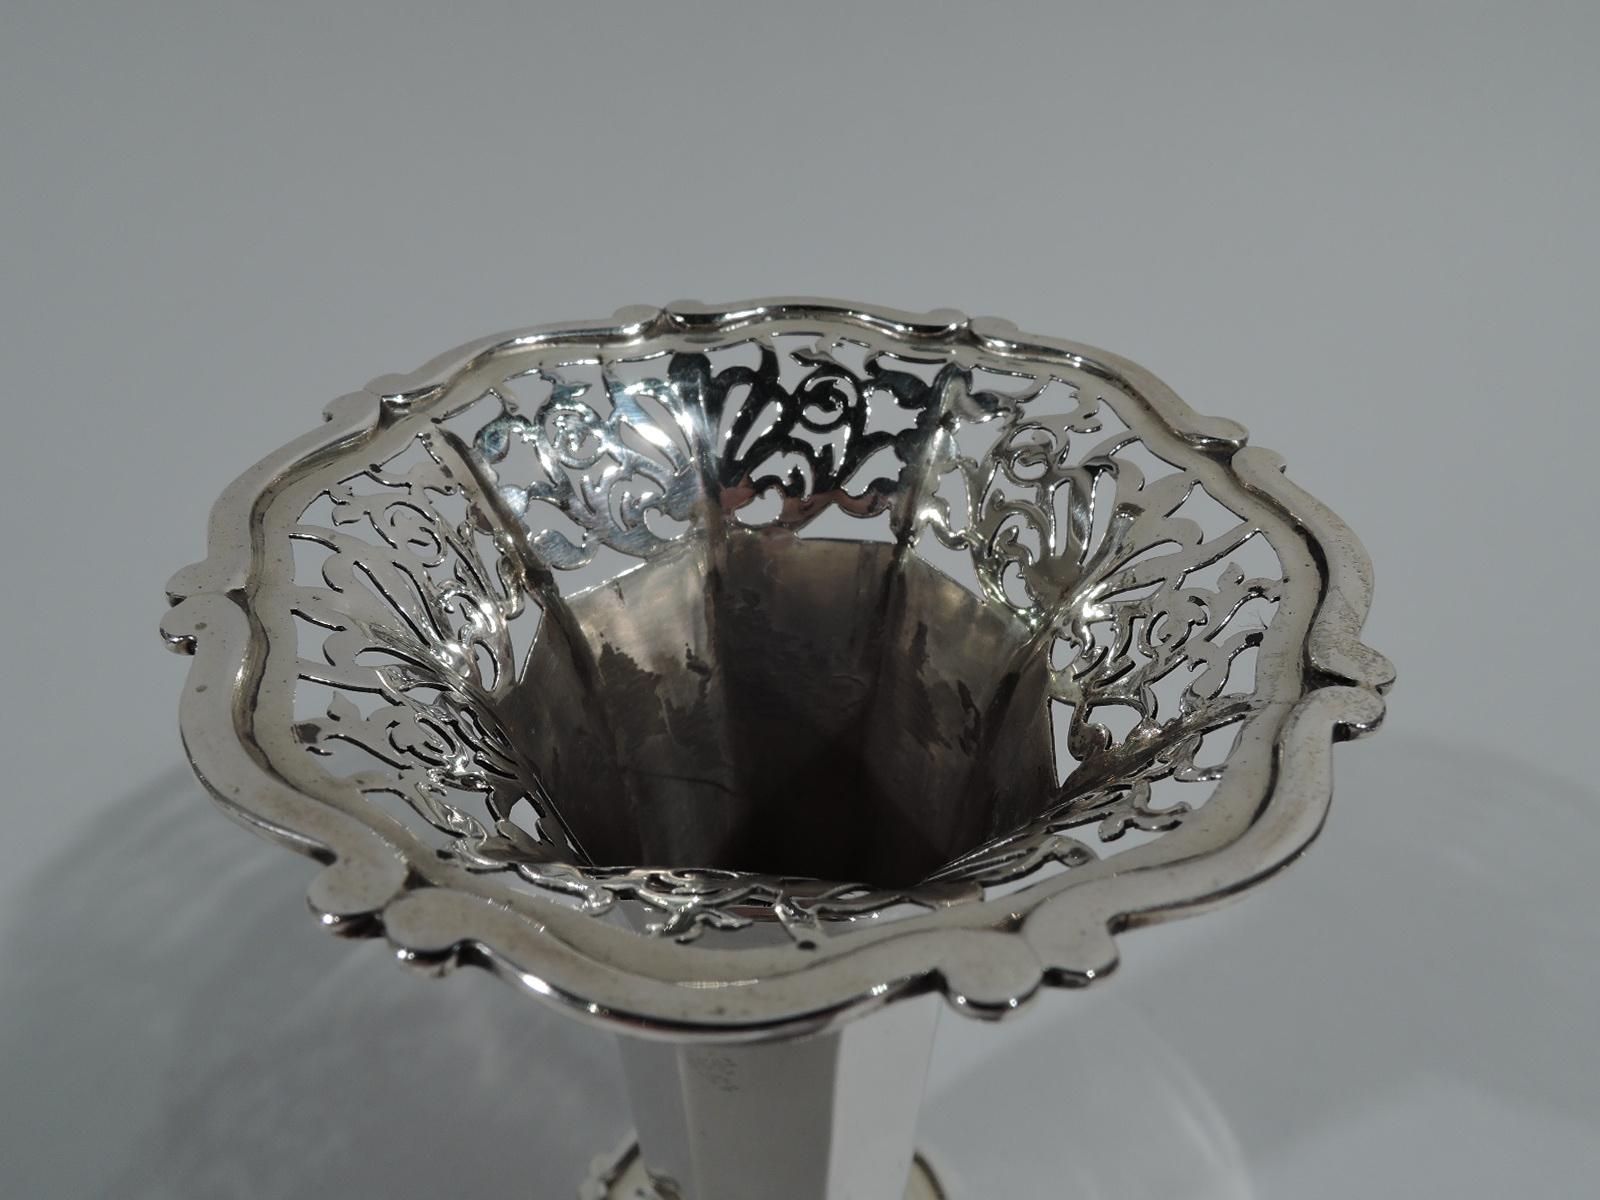 Edwardian sterling silver bud vase. Made by Goldsmiths & Silversmiths in London in 1906. Faceted and tapering on raised and faceted foot with scrolled rim. Mouth rim same with pierced ornamental band. Fully marked including design no. 349996.